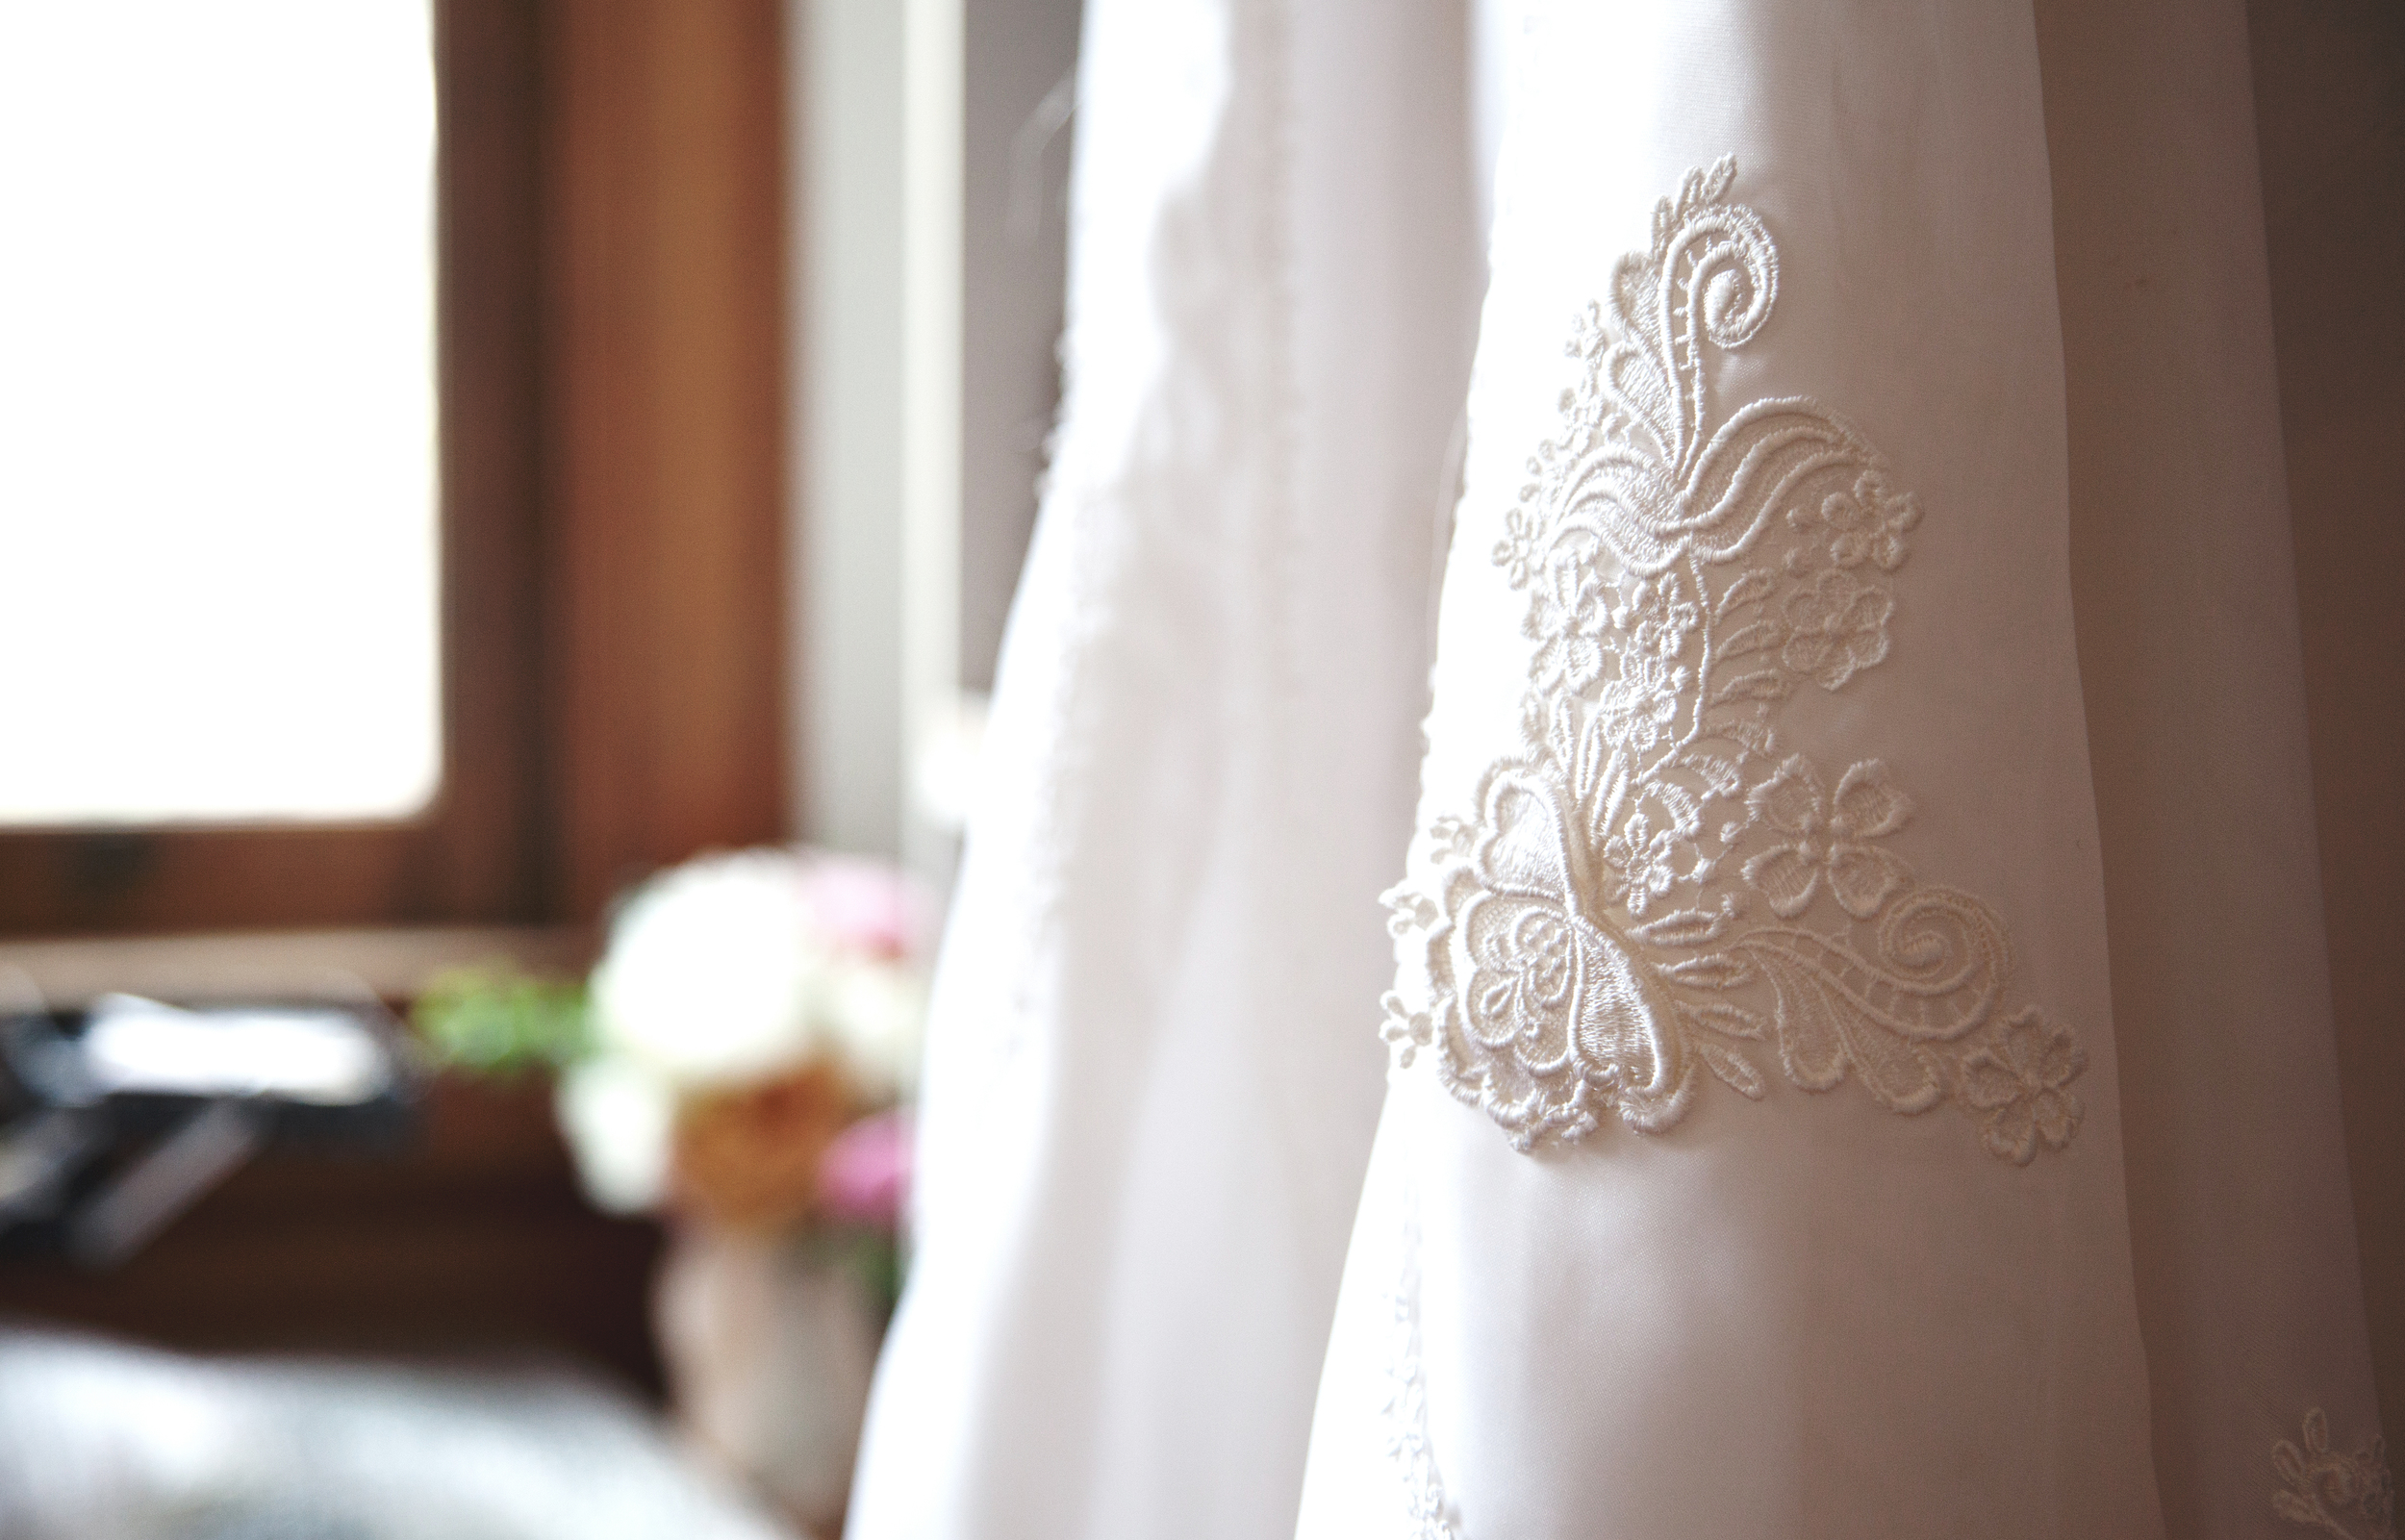  my mom's dress - this lace. &nbsp;Wow. 